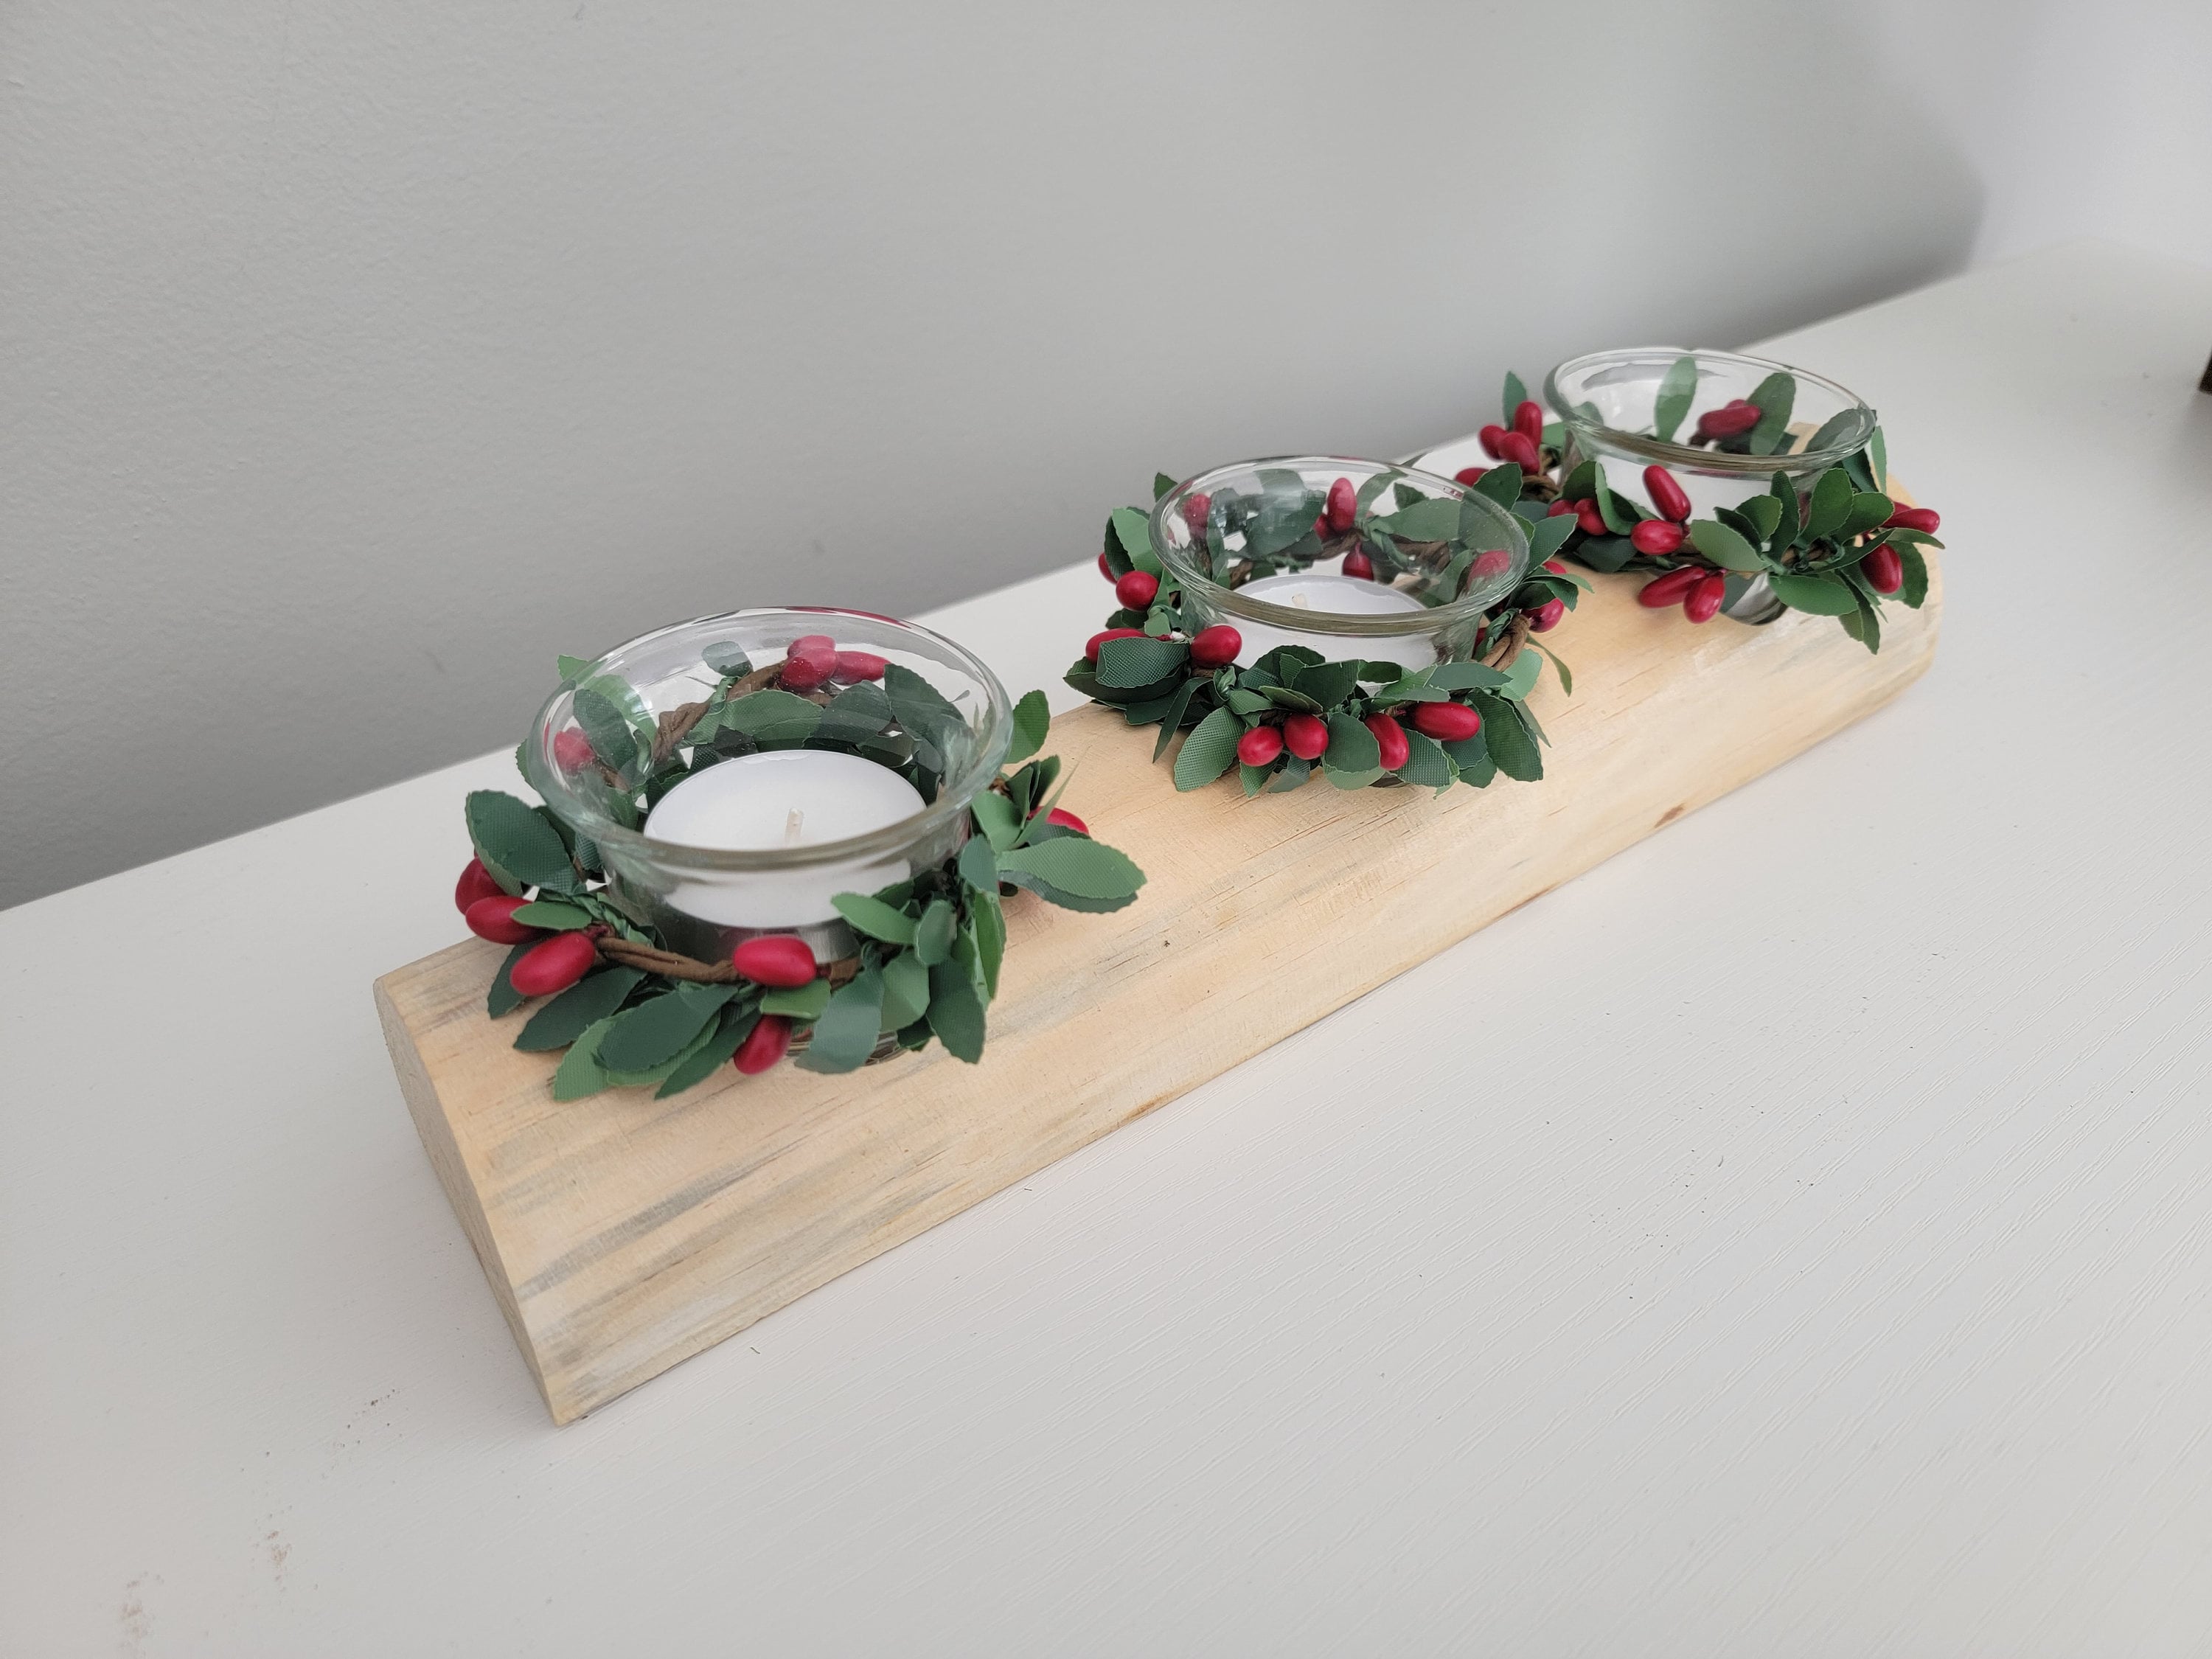 Birch yule log candle holder - Comes with tea light candle